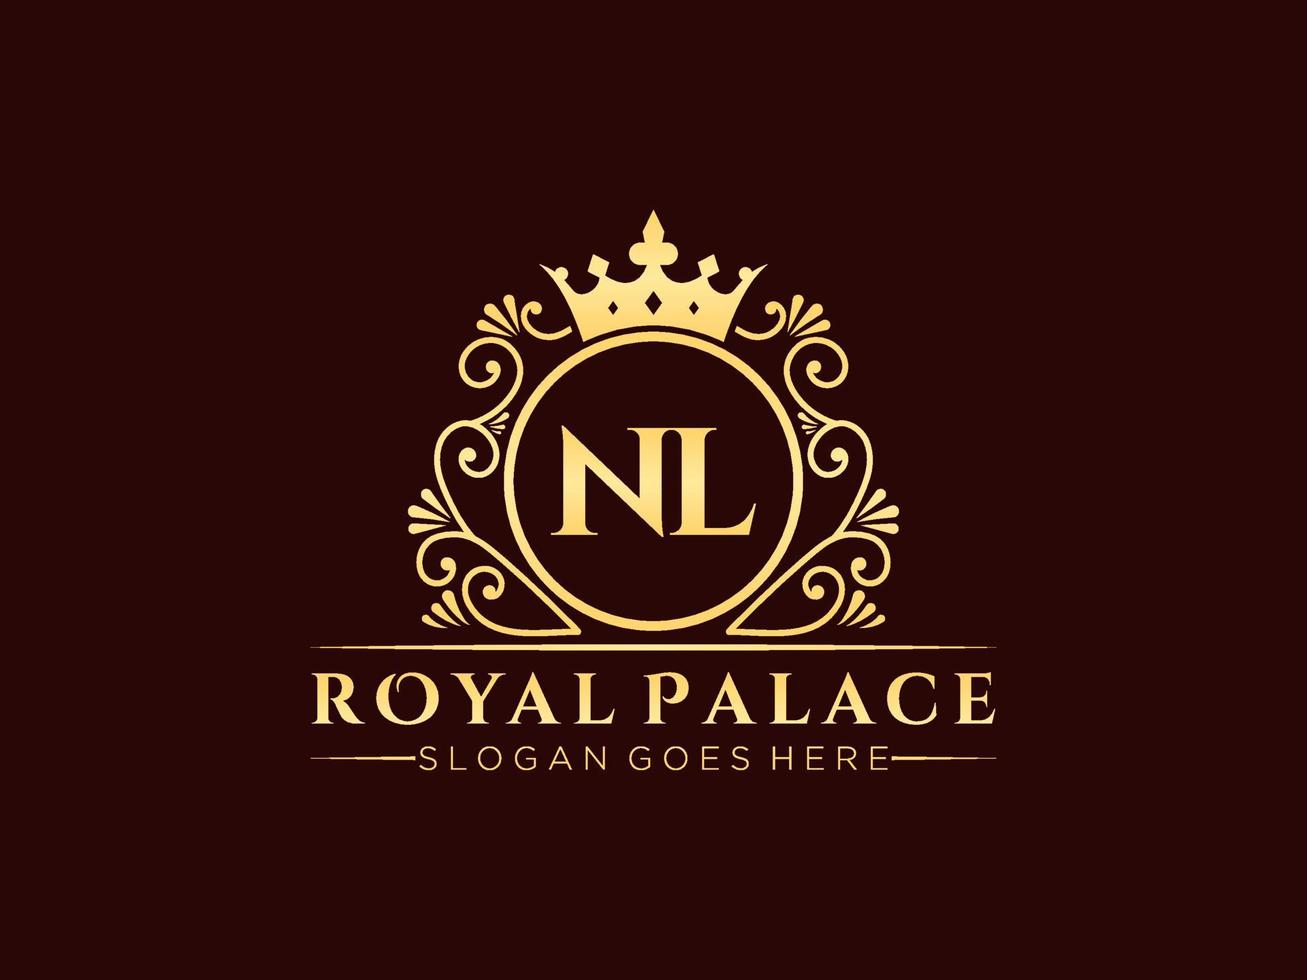 Letter NL Antique royal luxury victorian logo with ornamental frame. vector